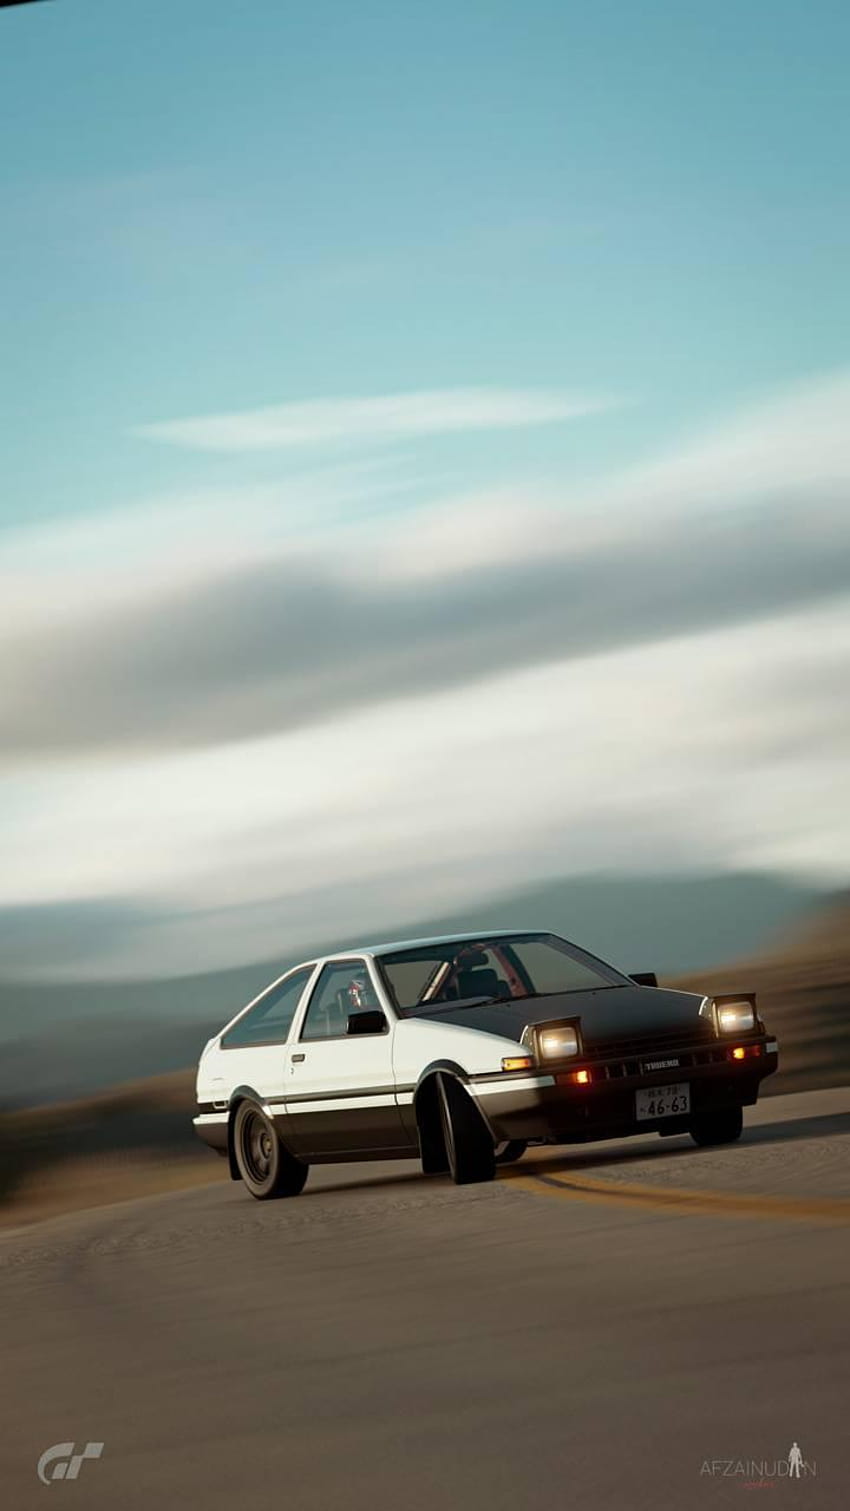 An AE86 wallpaper I just made : r/initiald